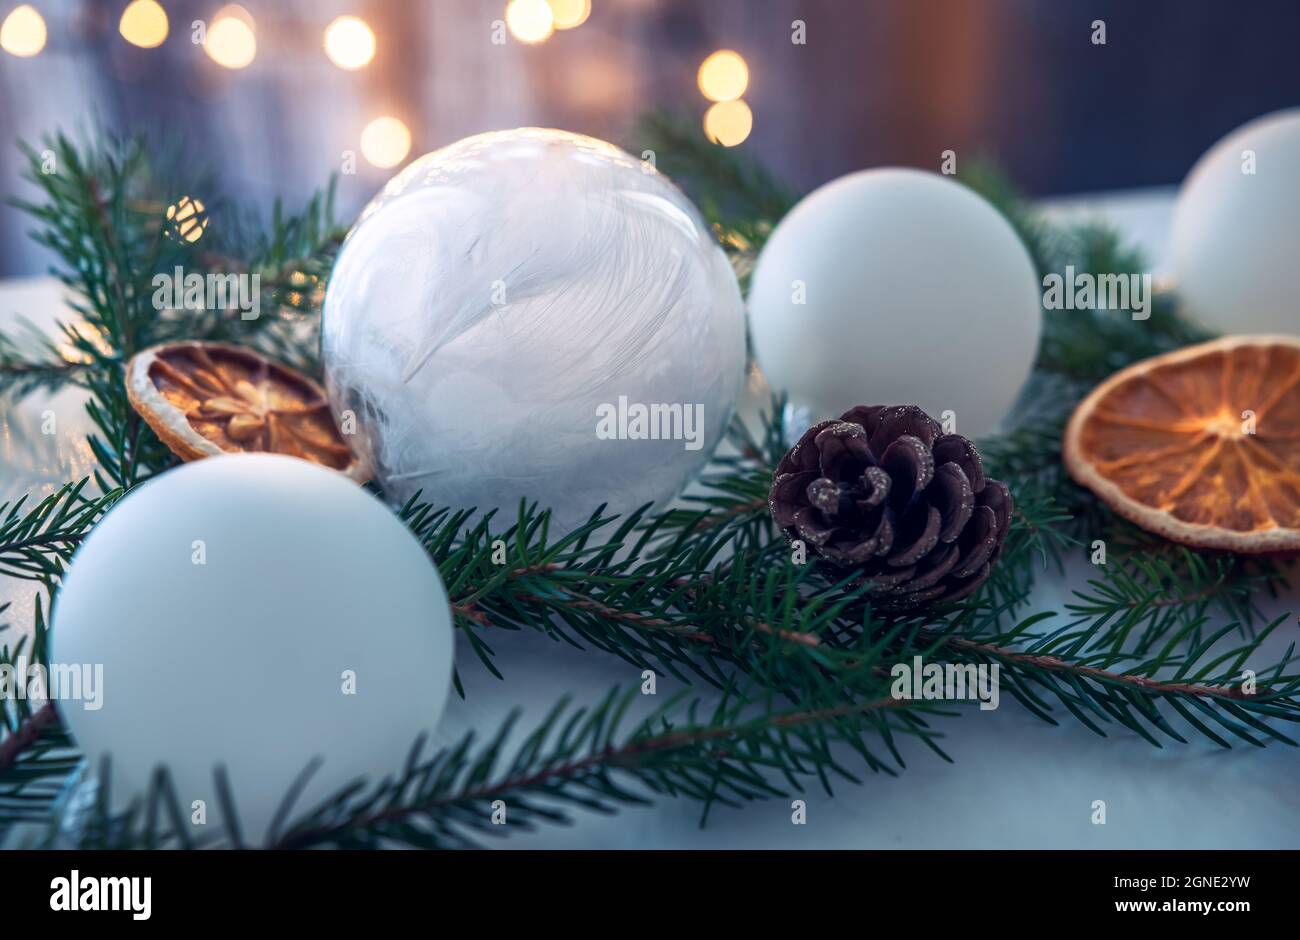 Christmas decoration set made of white Christmas balls, spruce sprigs, cones and dried oranges and lemons. Lightened lights in the background. Stock Photo